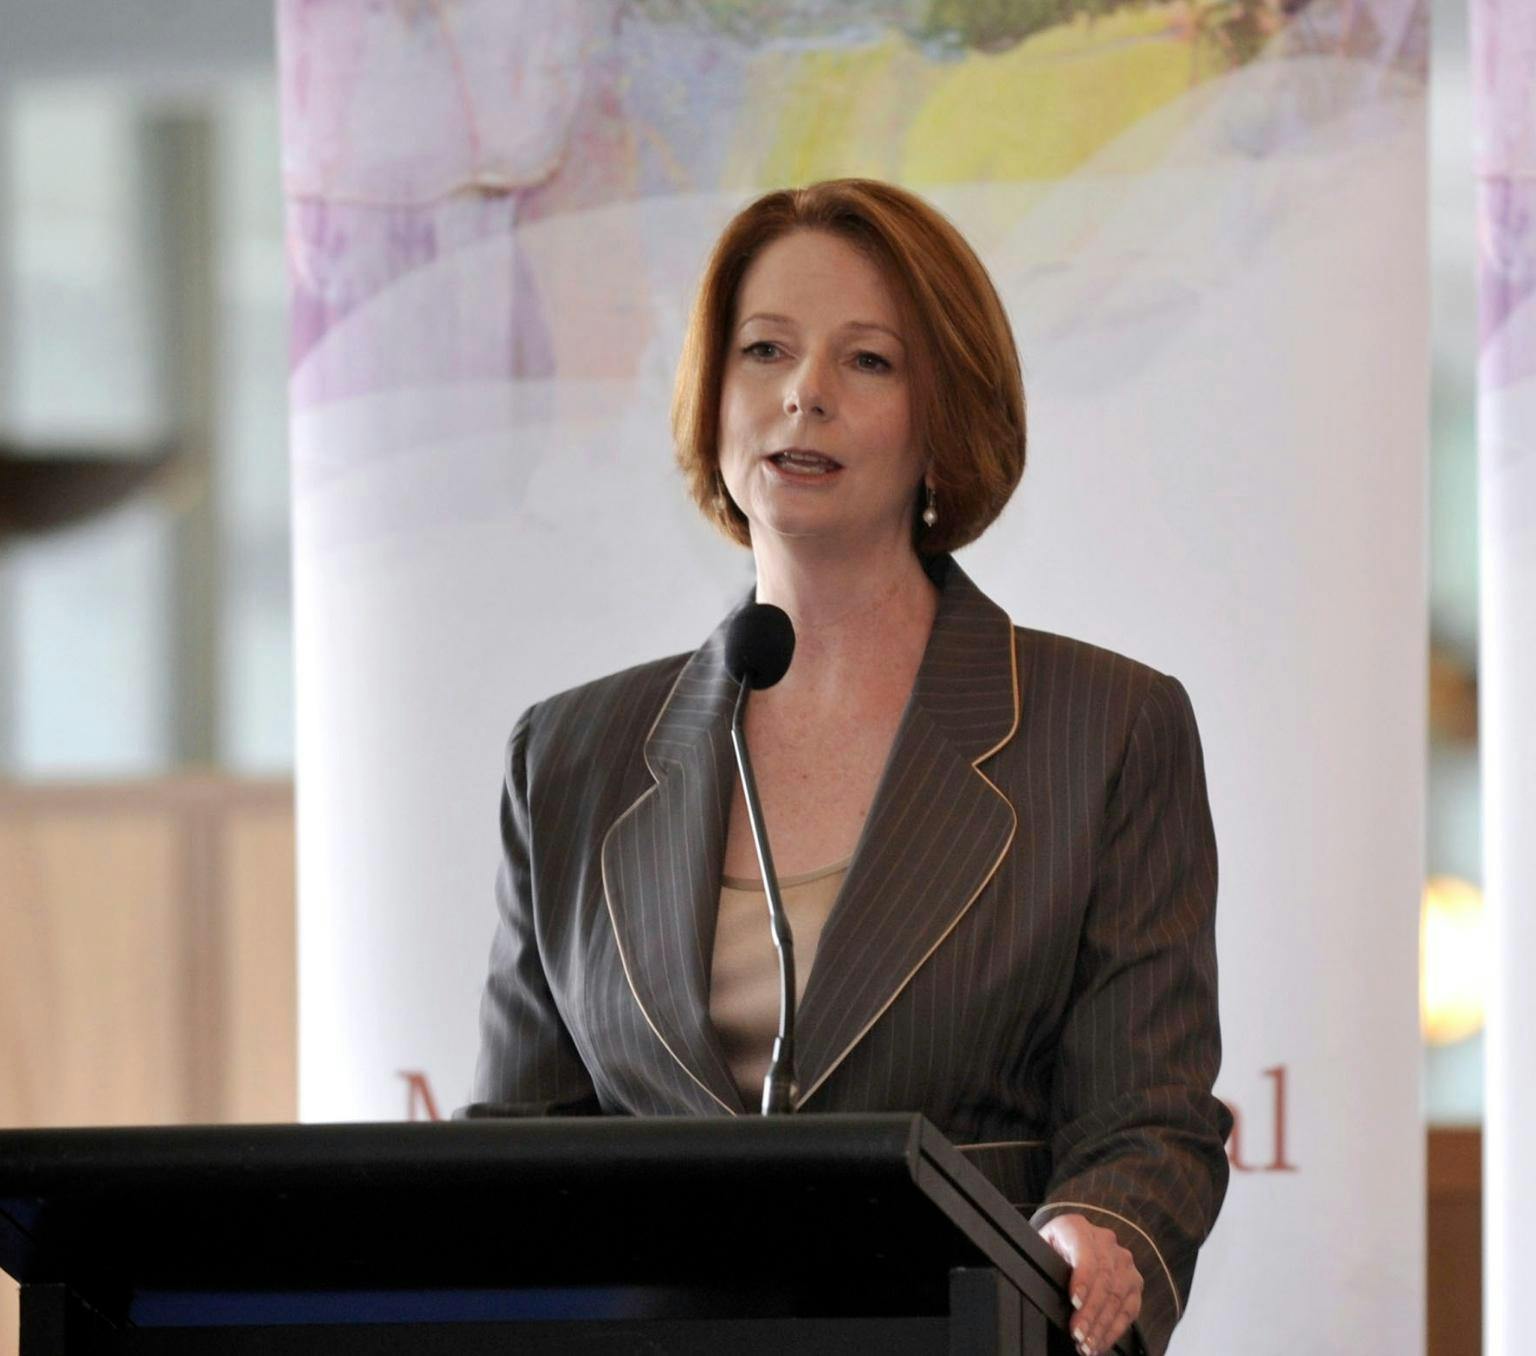 A woman is standing at a lecturn mid speech. She is wearing a grey suit and has red hair